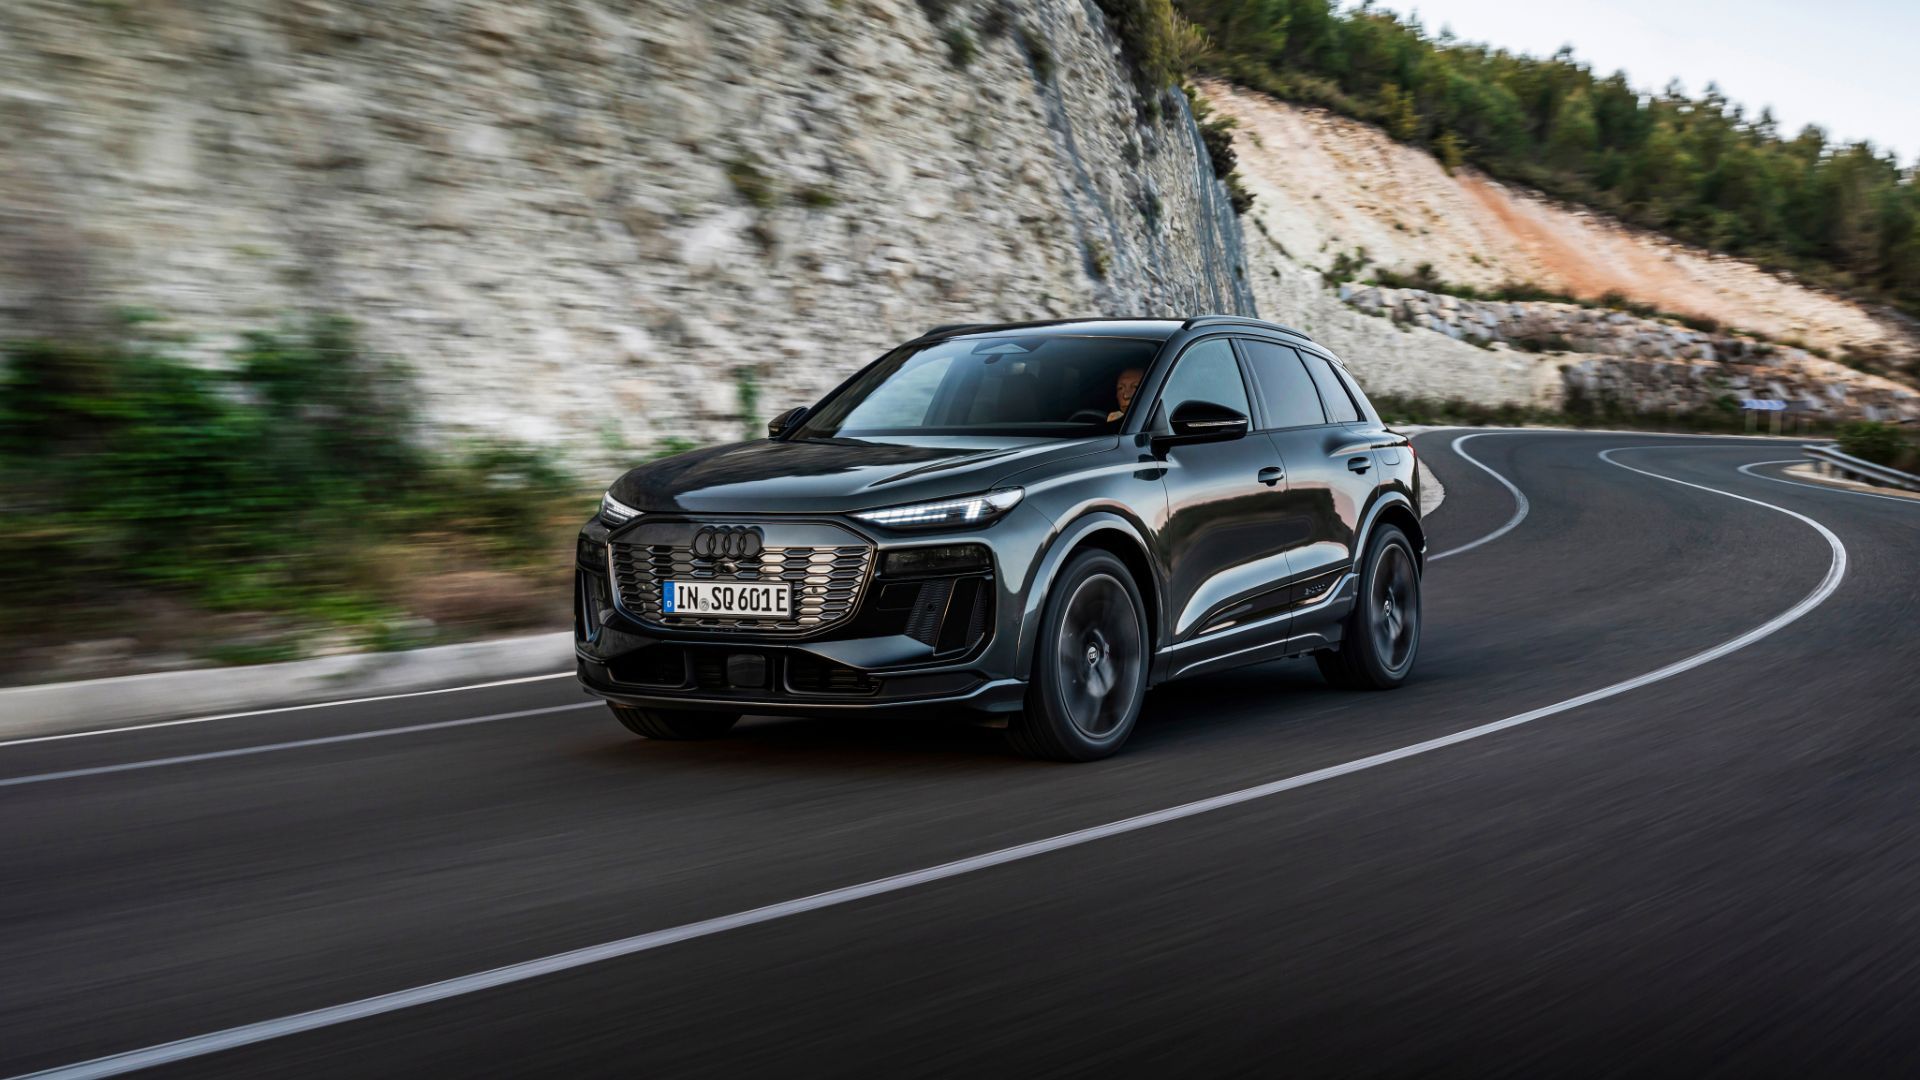 Excitement heightened: The Audi Q6 e-tron and the Audi SQ6 e-tron (picture above) represent the transformation of the four rings into a leader in the field of electric mobility. With a new platform, electronics architecture, charging and battery technology, as well as a pioneering design for Audi, the Q6 e-tron paves the way to Audi's all-electric future.